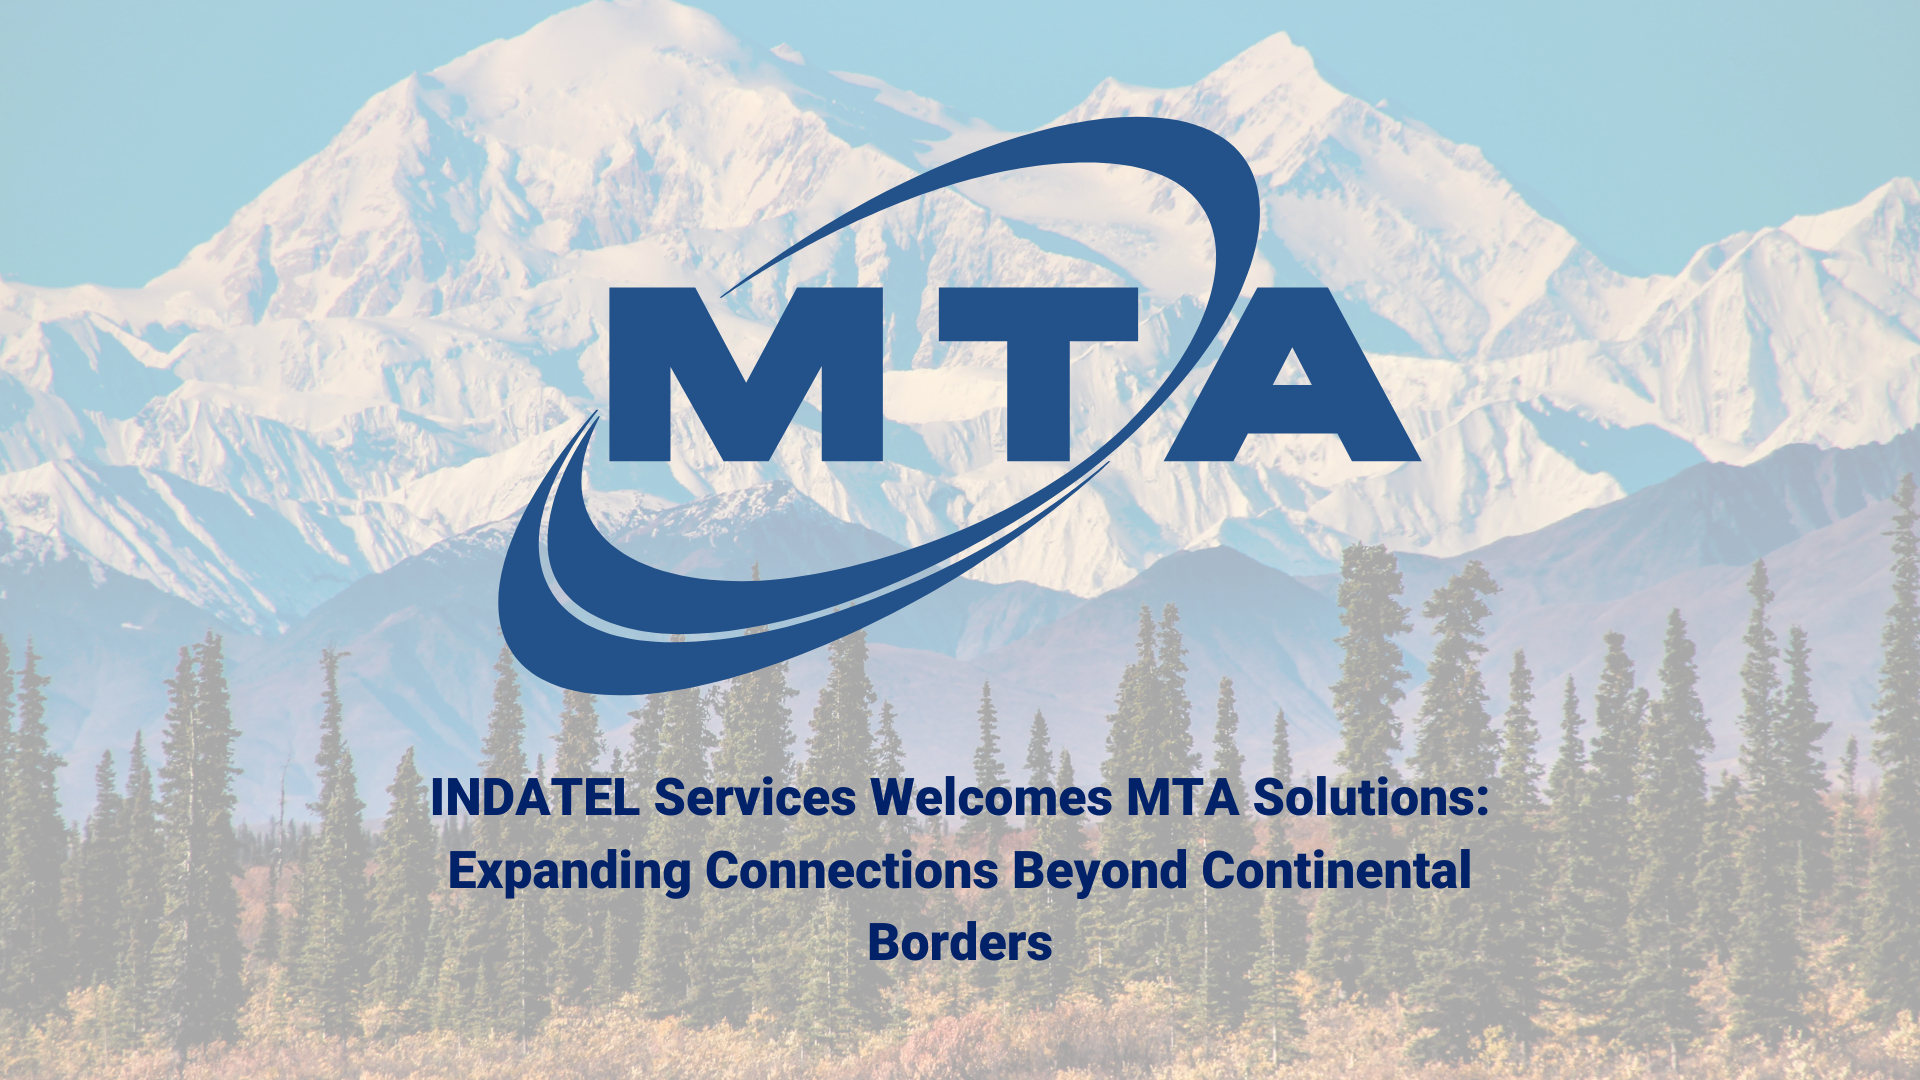 INDATEL Welcomes MTA Solutions: Expanding Connections Beyond Continental Borders featured image